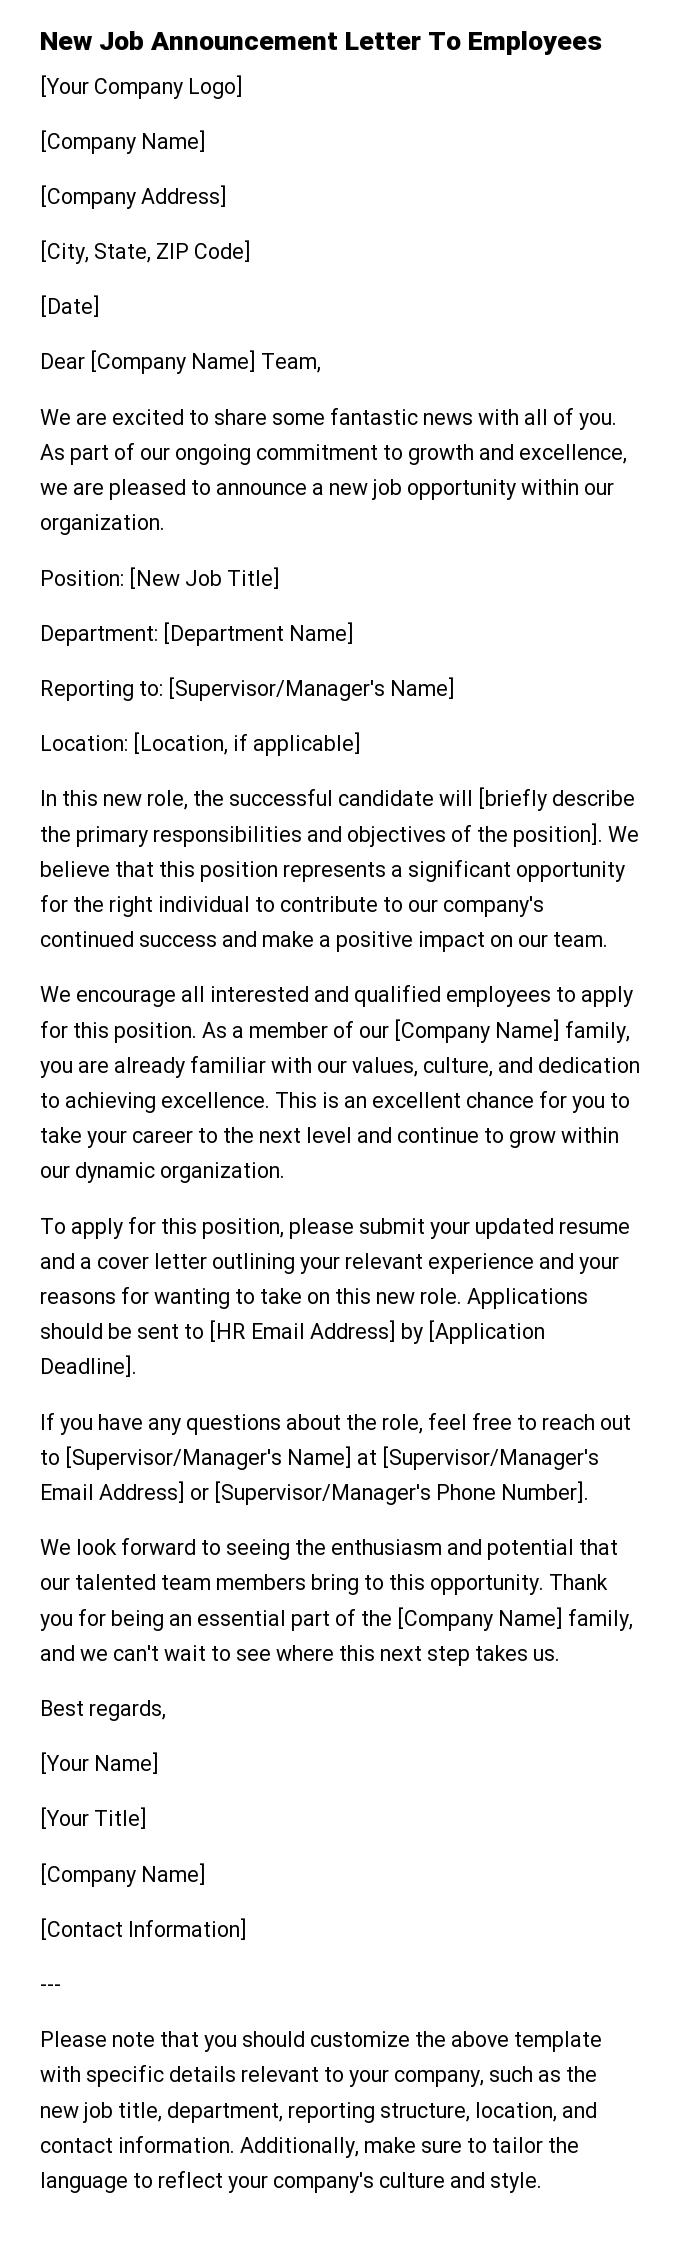 New Job Announcement Letter To Employees